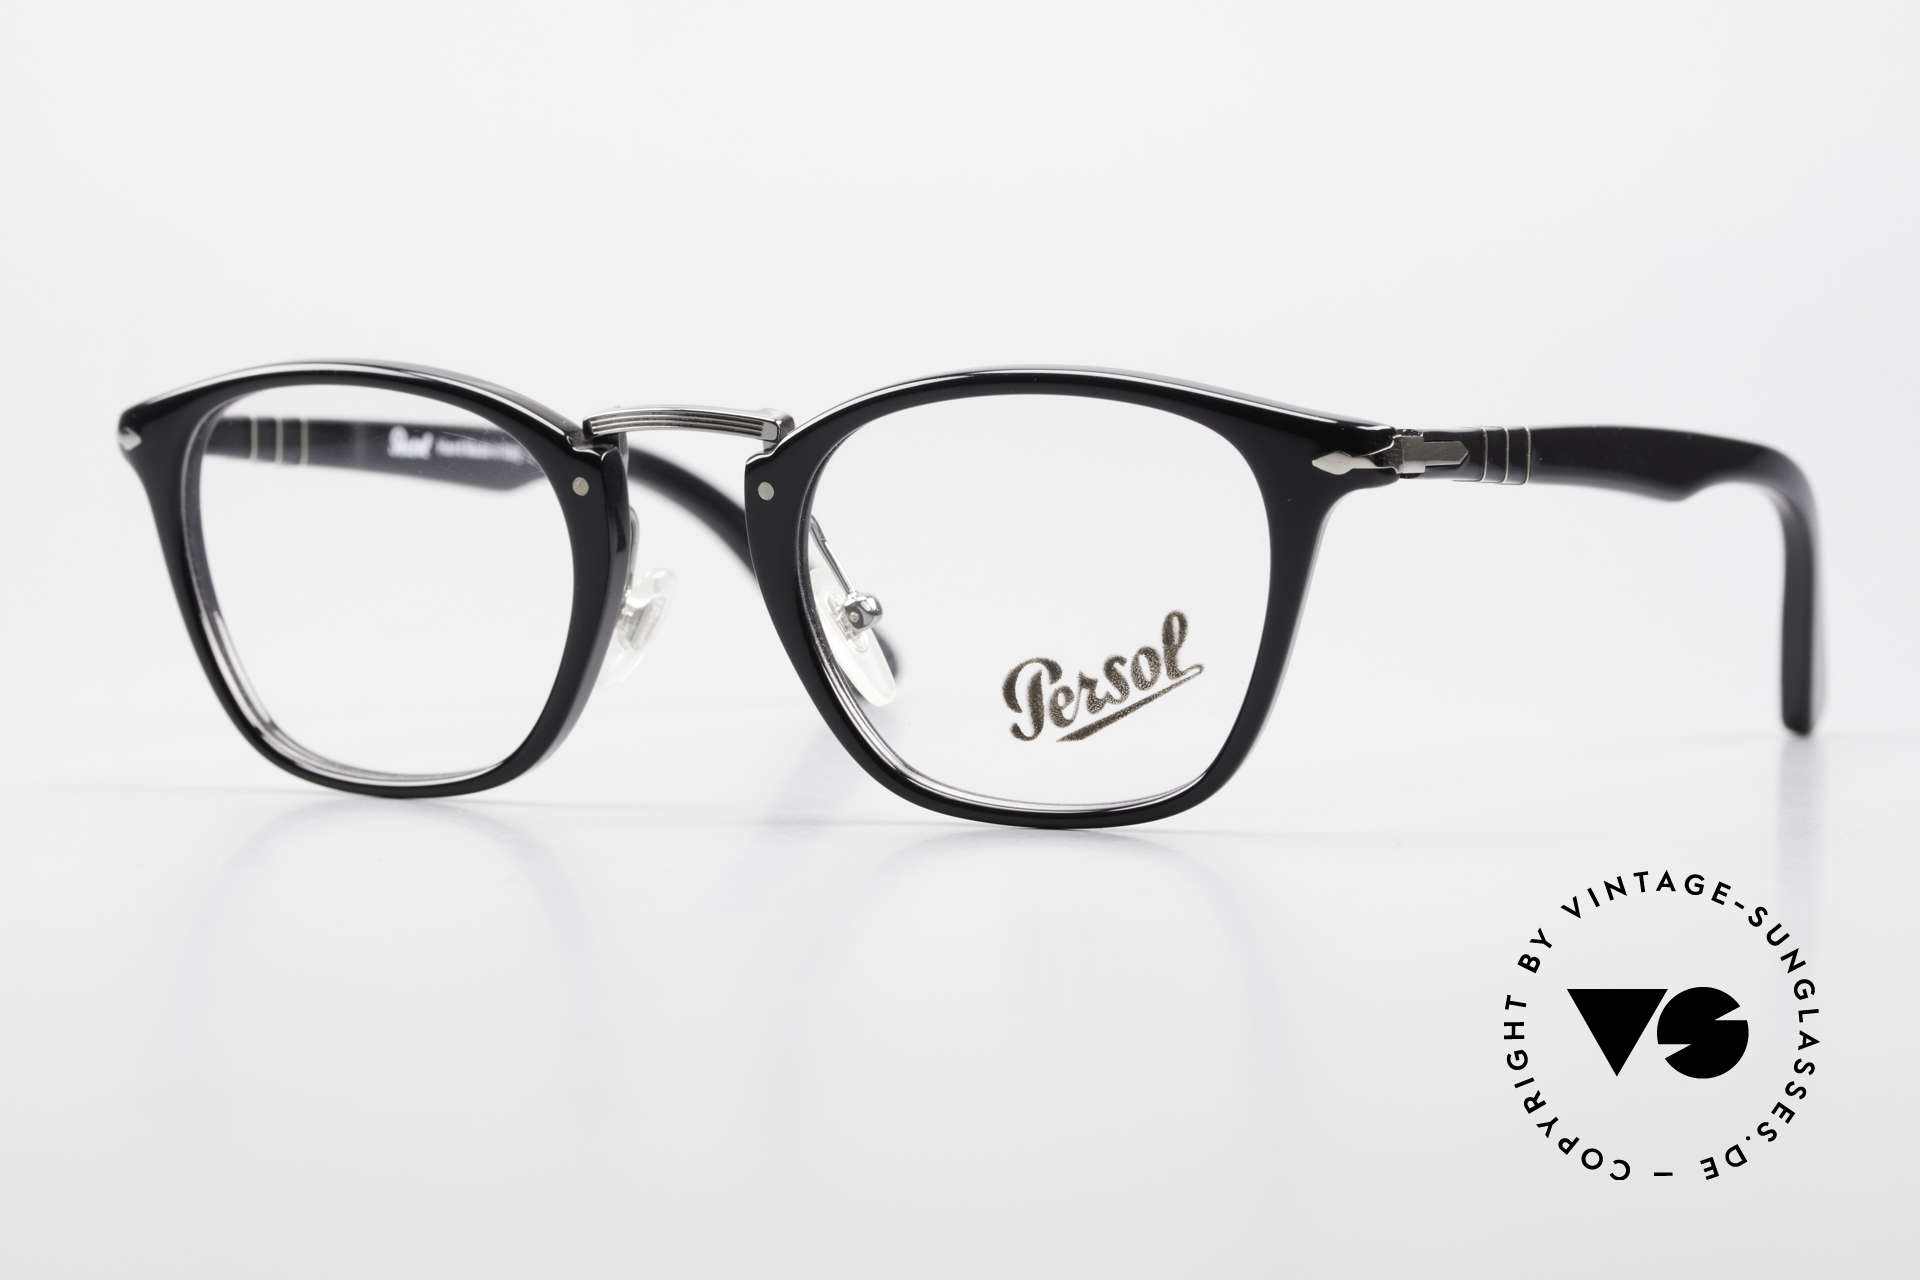 Persol 3109 Typewriter Edition Eyewear, very elegant Persol eyeglass-frame from Italy, Made for Men and Women